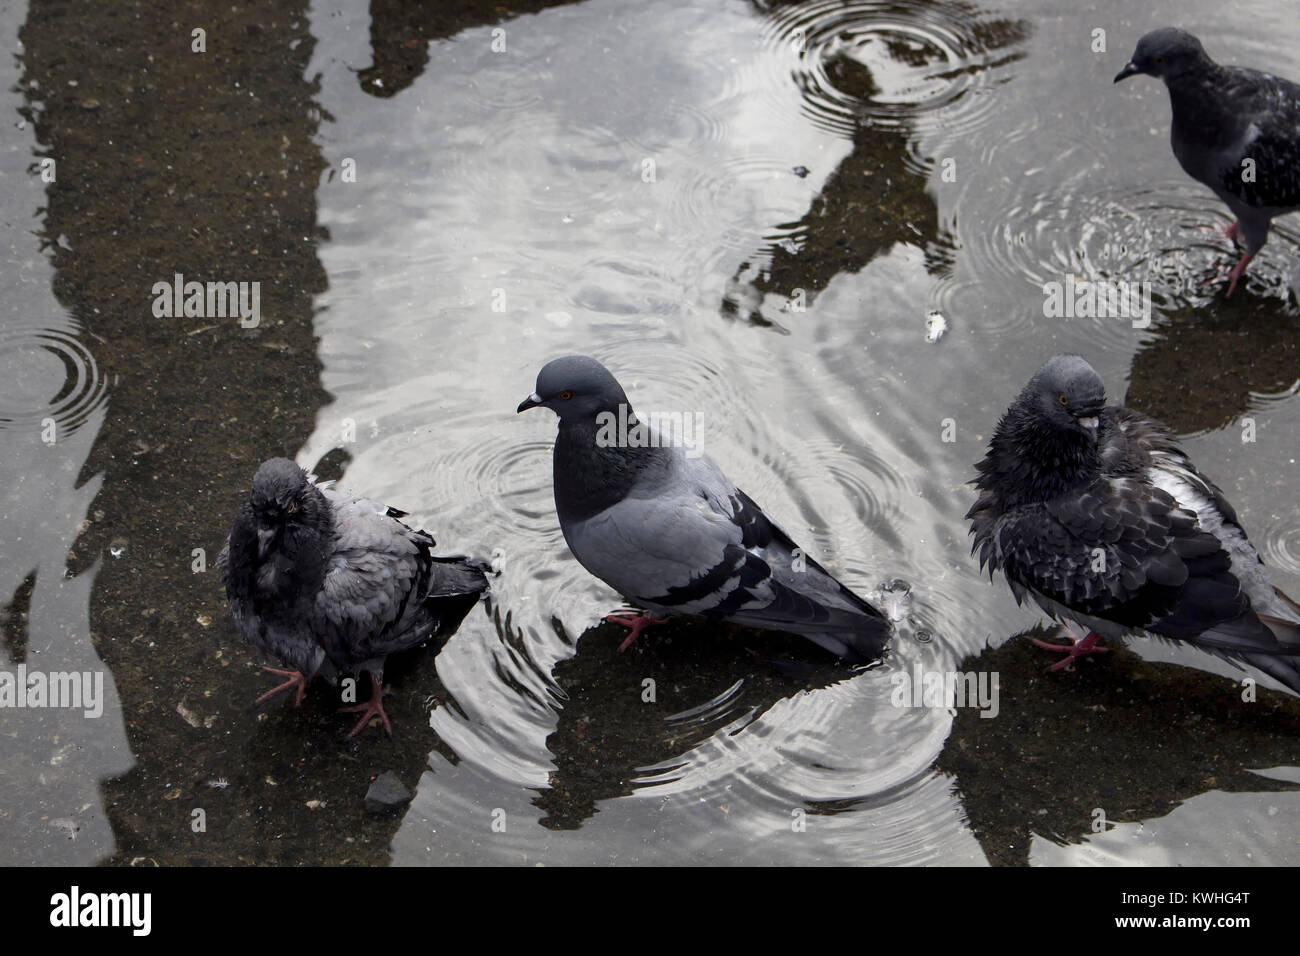 Pigeons take bath in water on ground. Stock Photo